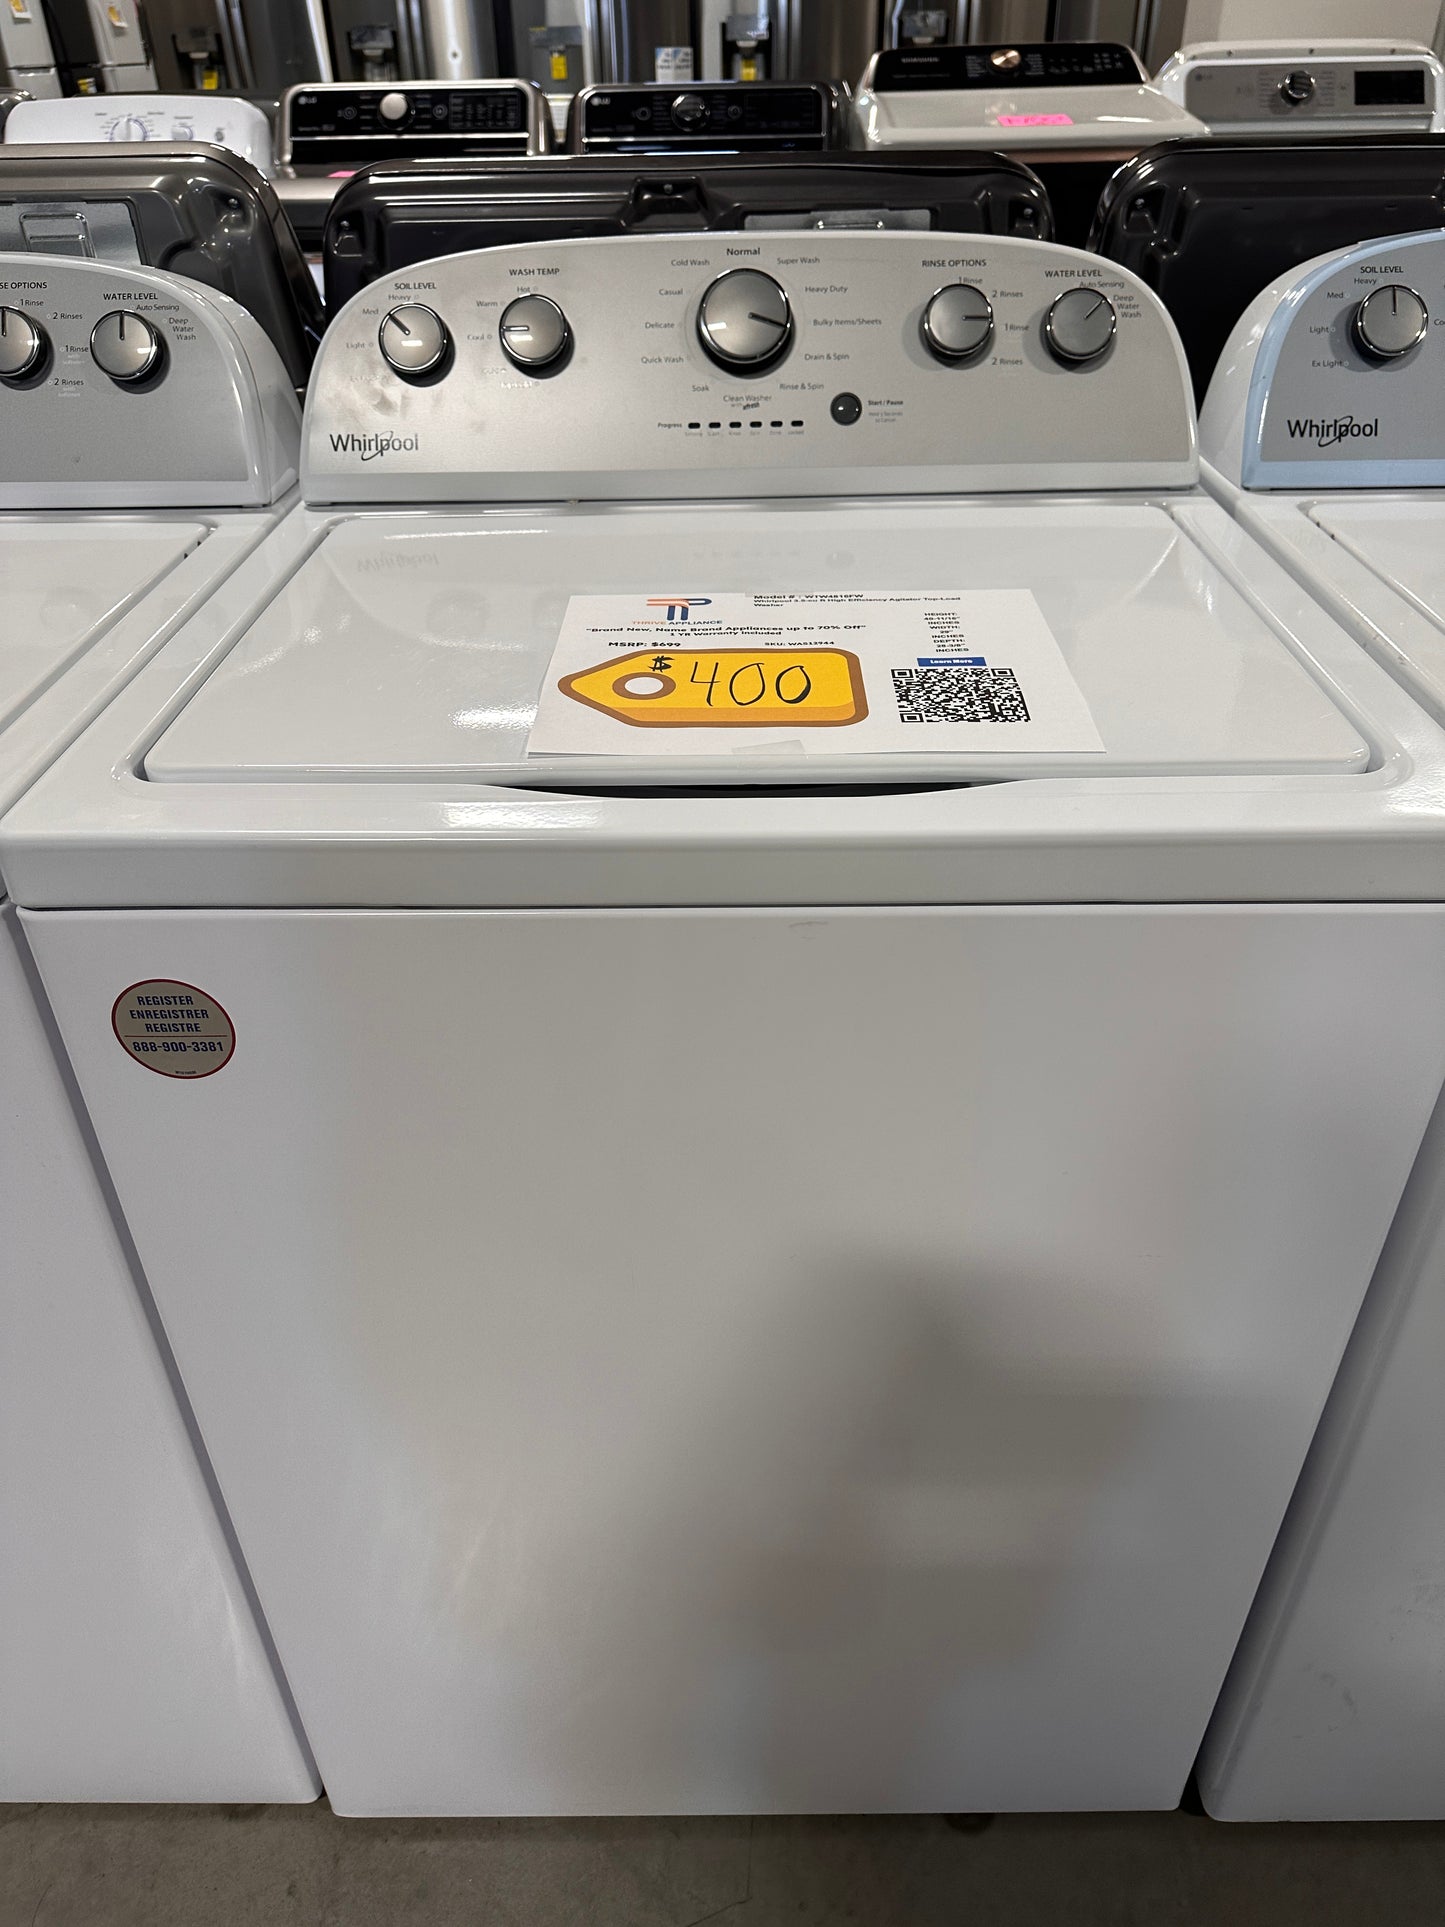 12-CYCLE TOP LOAD WASHER - WAS12944 WTW4816FW